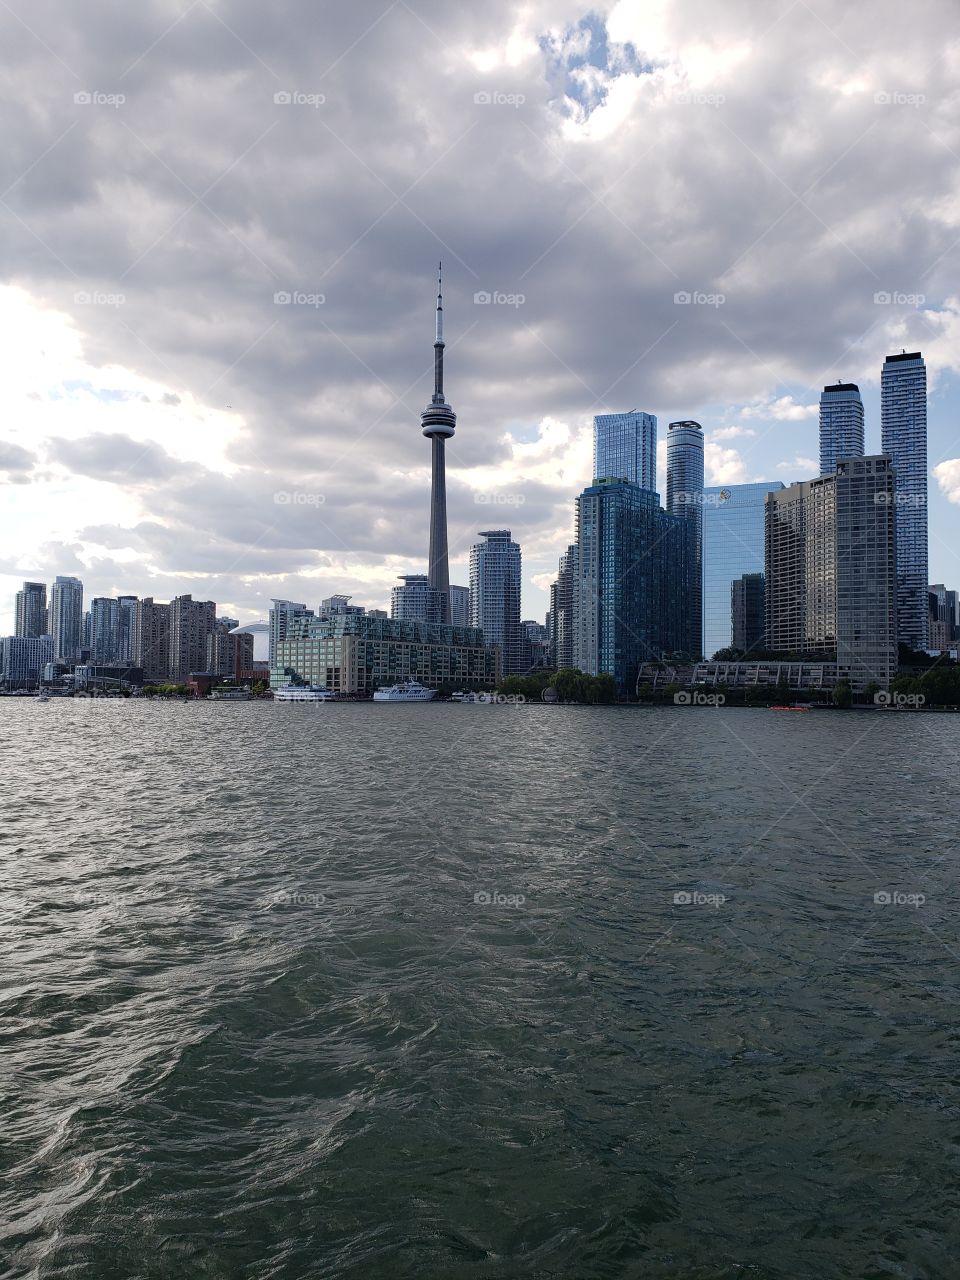 Early evening shot of the Toronto skyline, looking back from the ferry ride over to the Toronto Islands.